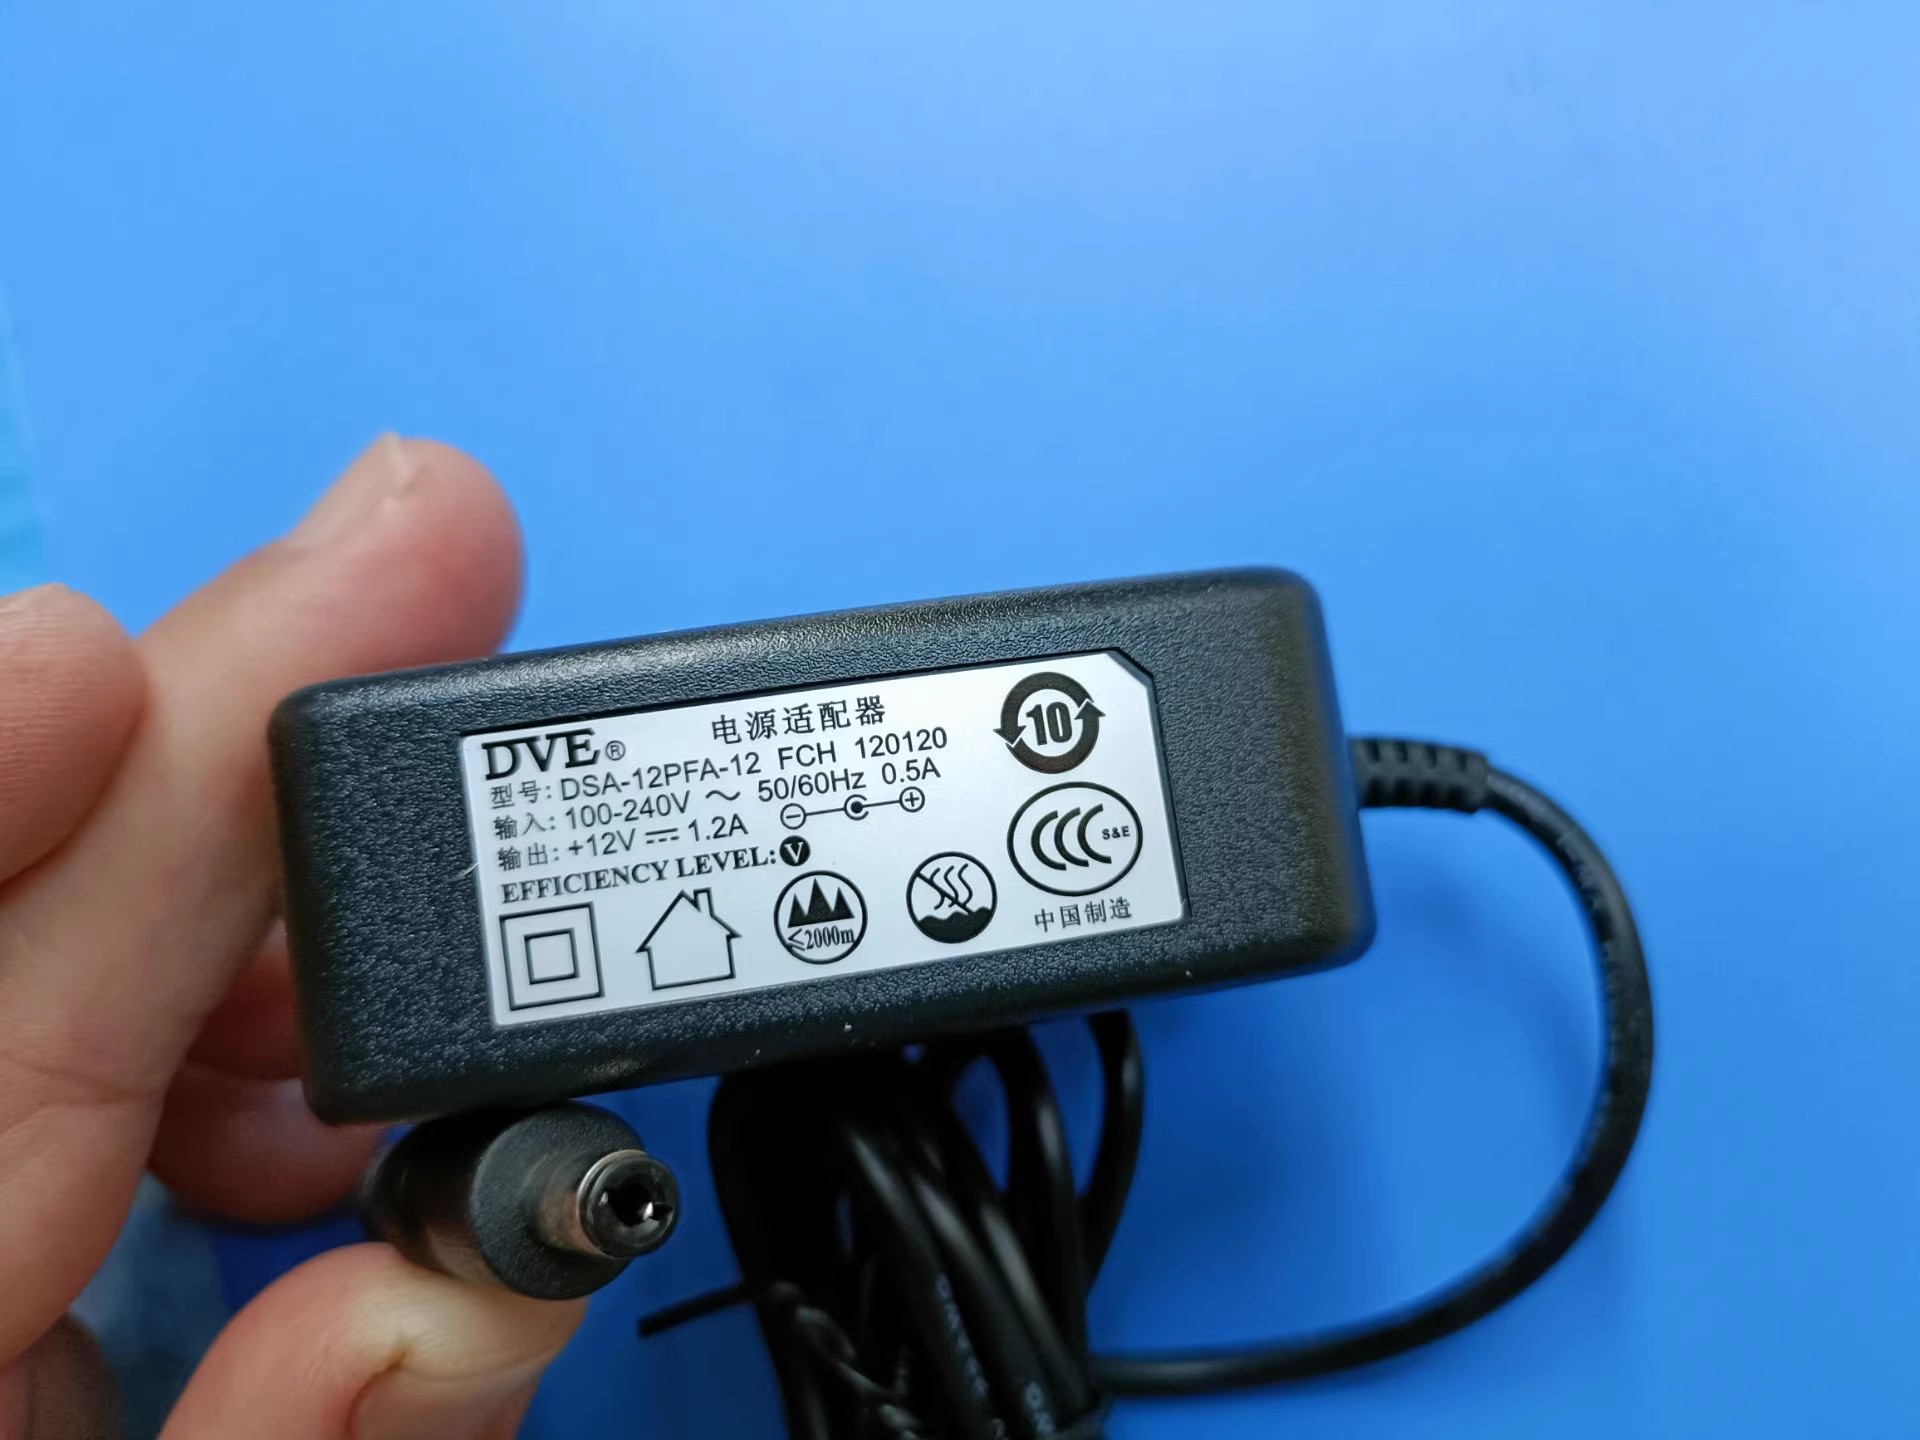 *Brand NEW*DVE LED DSA-12PFA-12 FCH 120120 TG188S TG199S TG168TS 12V 1.2A AC DC ADAPTHE POWER Supply - Click Image to Close